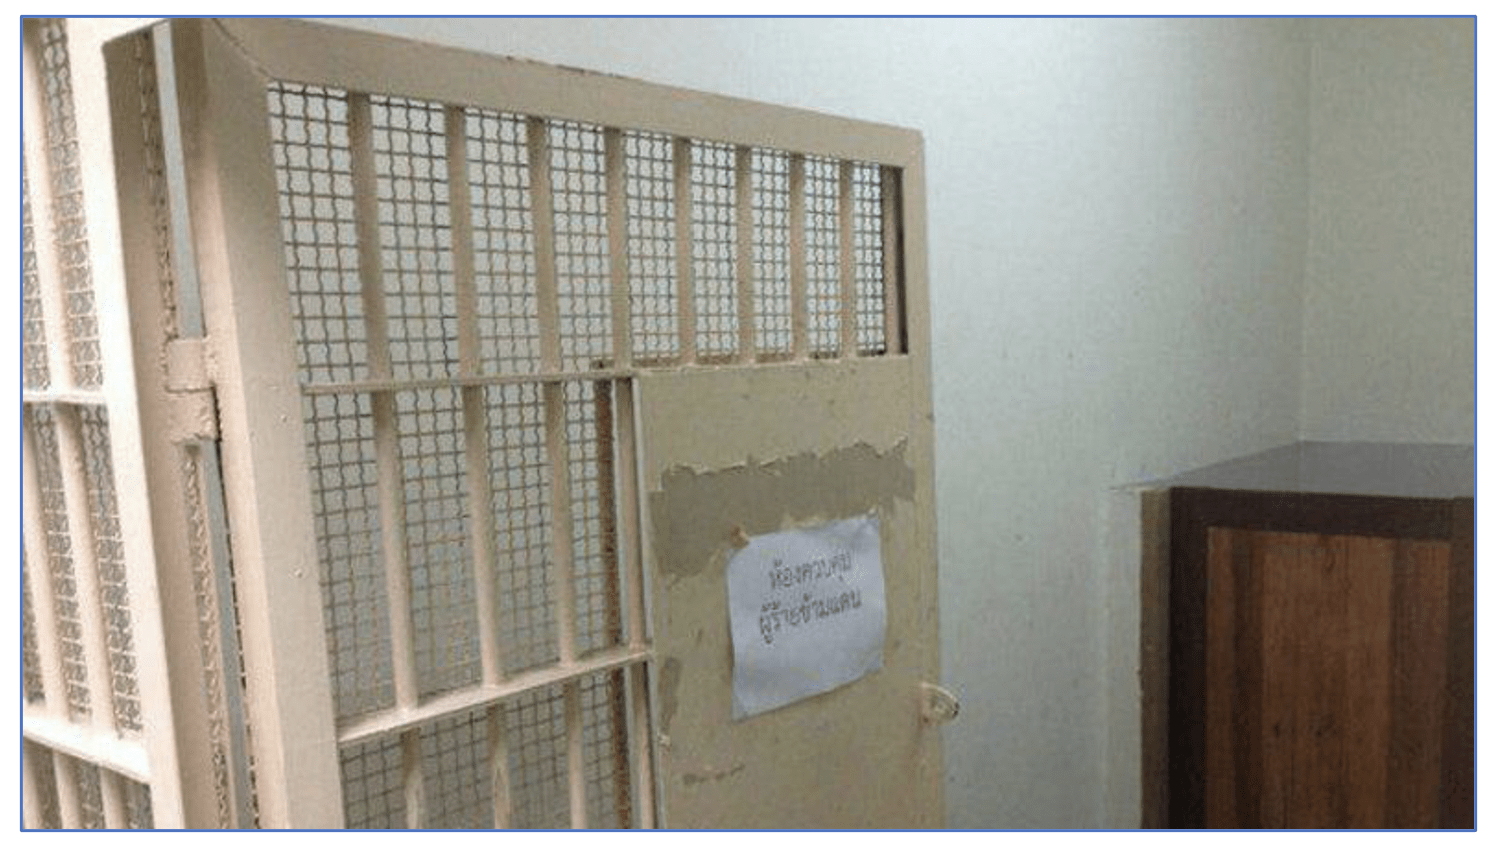 Images captured from Cazes’ jail cell in Bangkok, (Source)